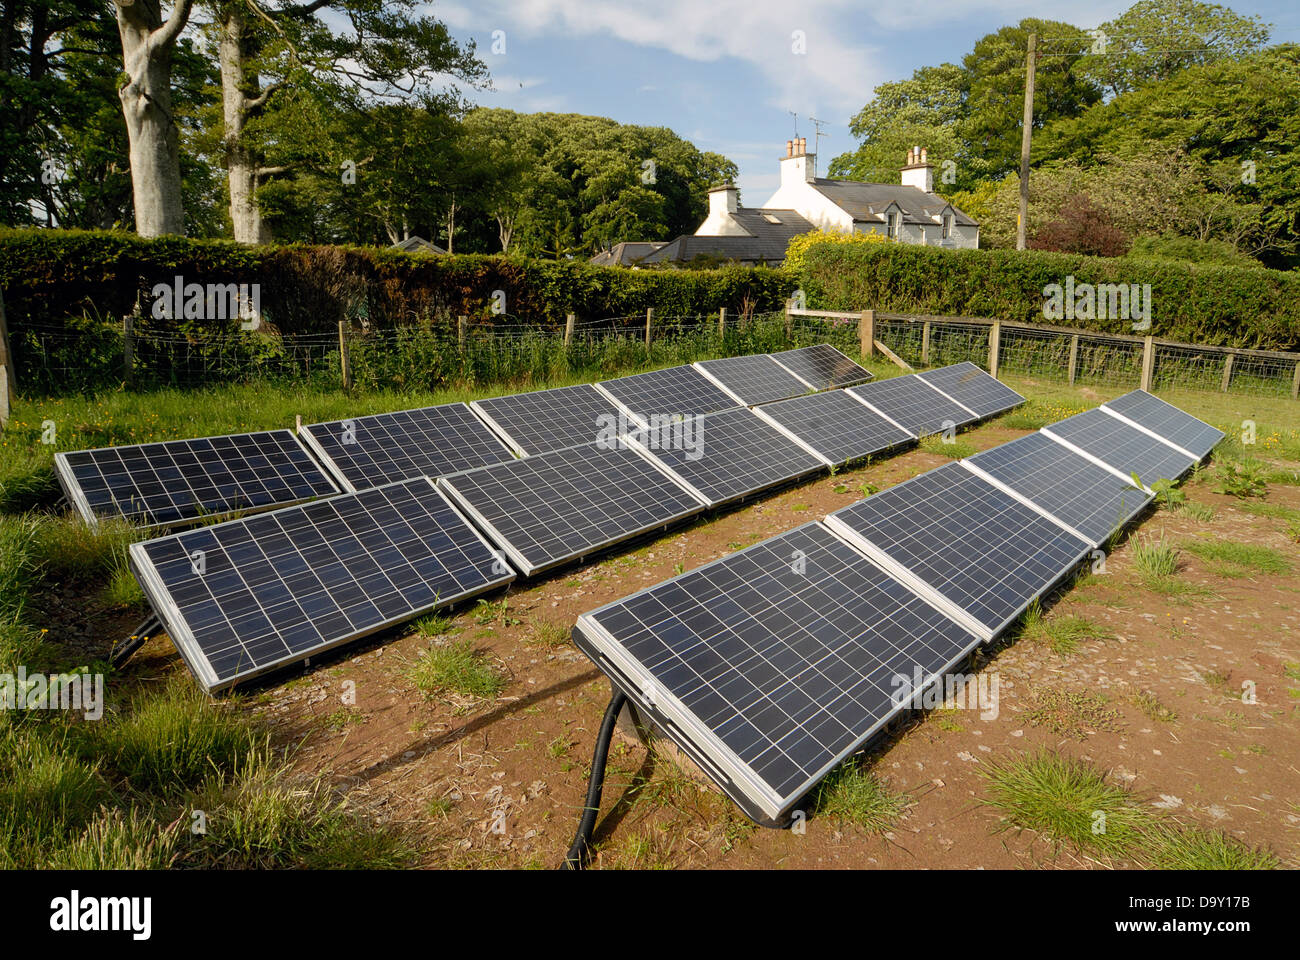 Home solar electricity generation system Stock Photo